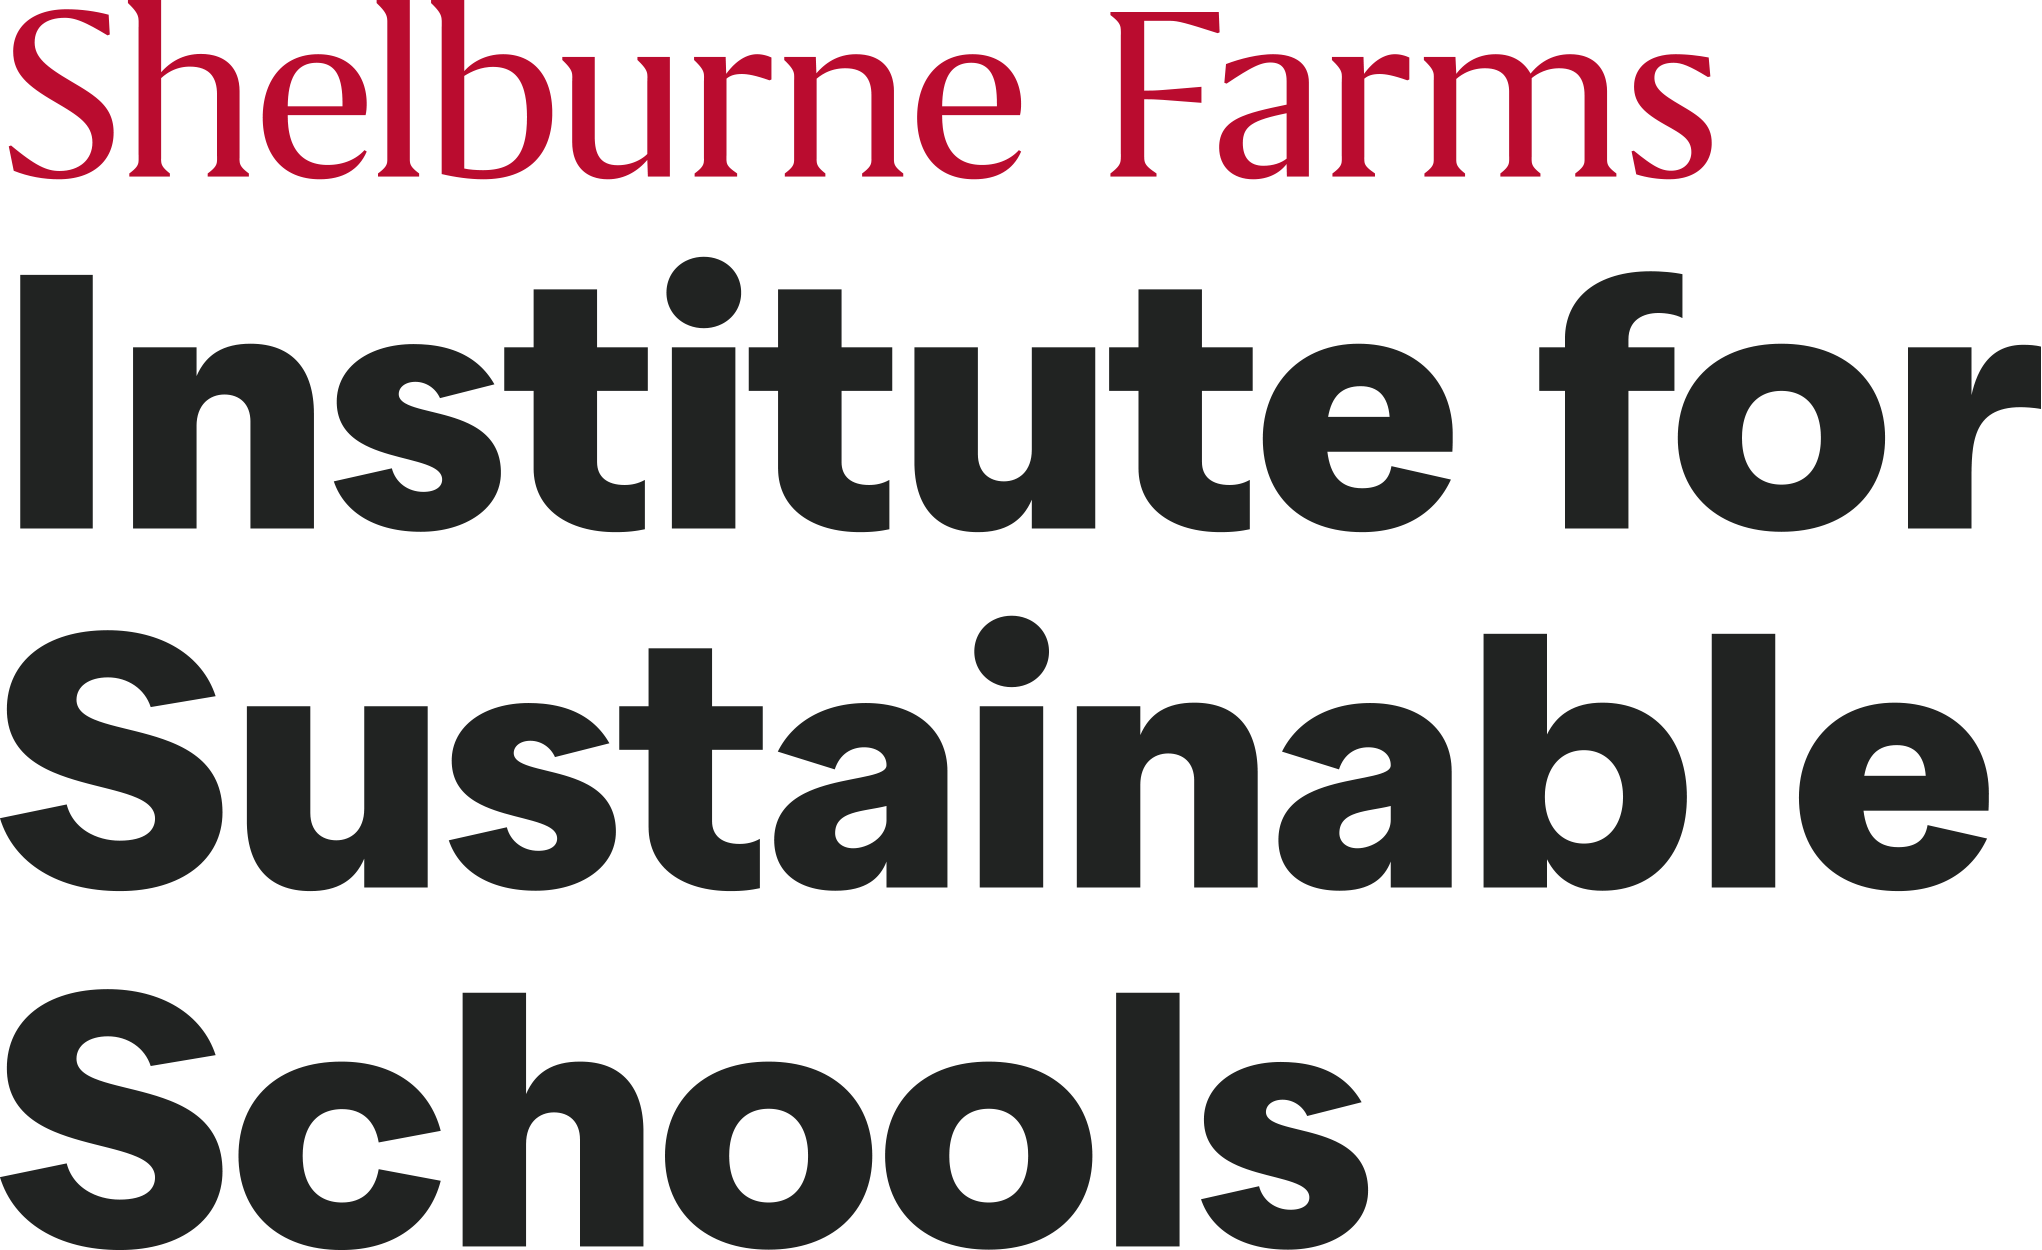 Shelburne Farms Institute for Sustainable Schools Wordmark